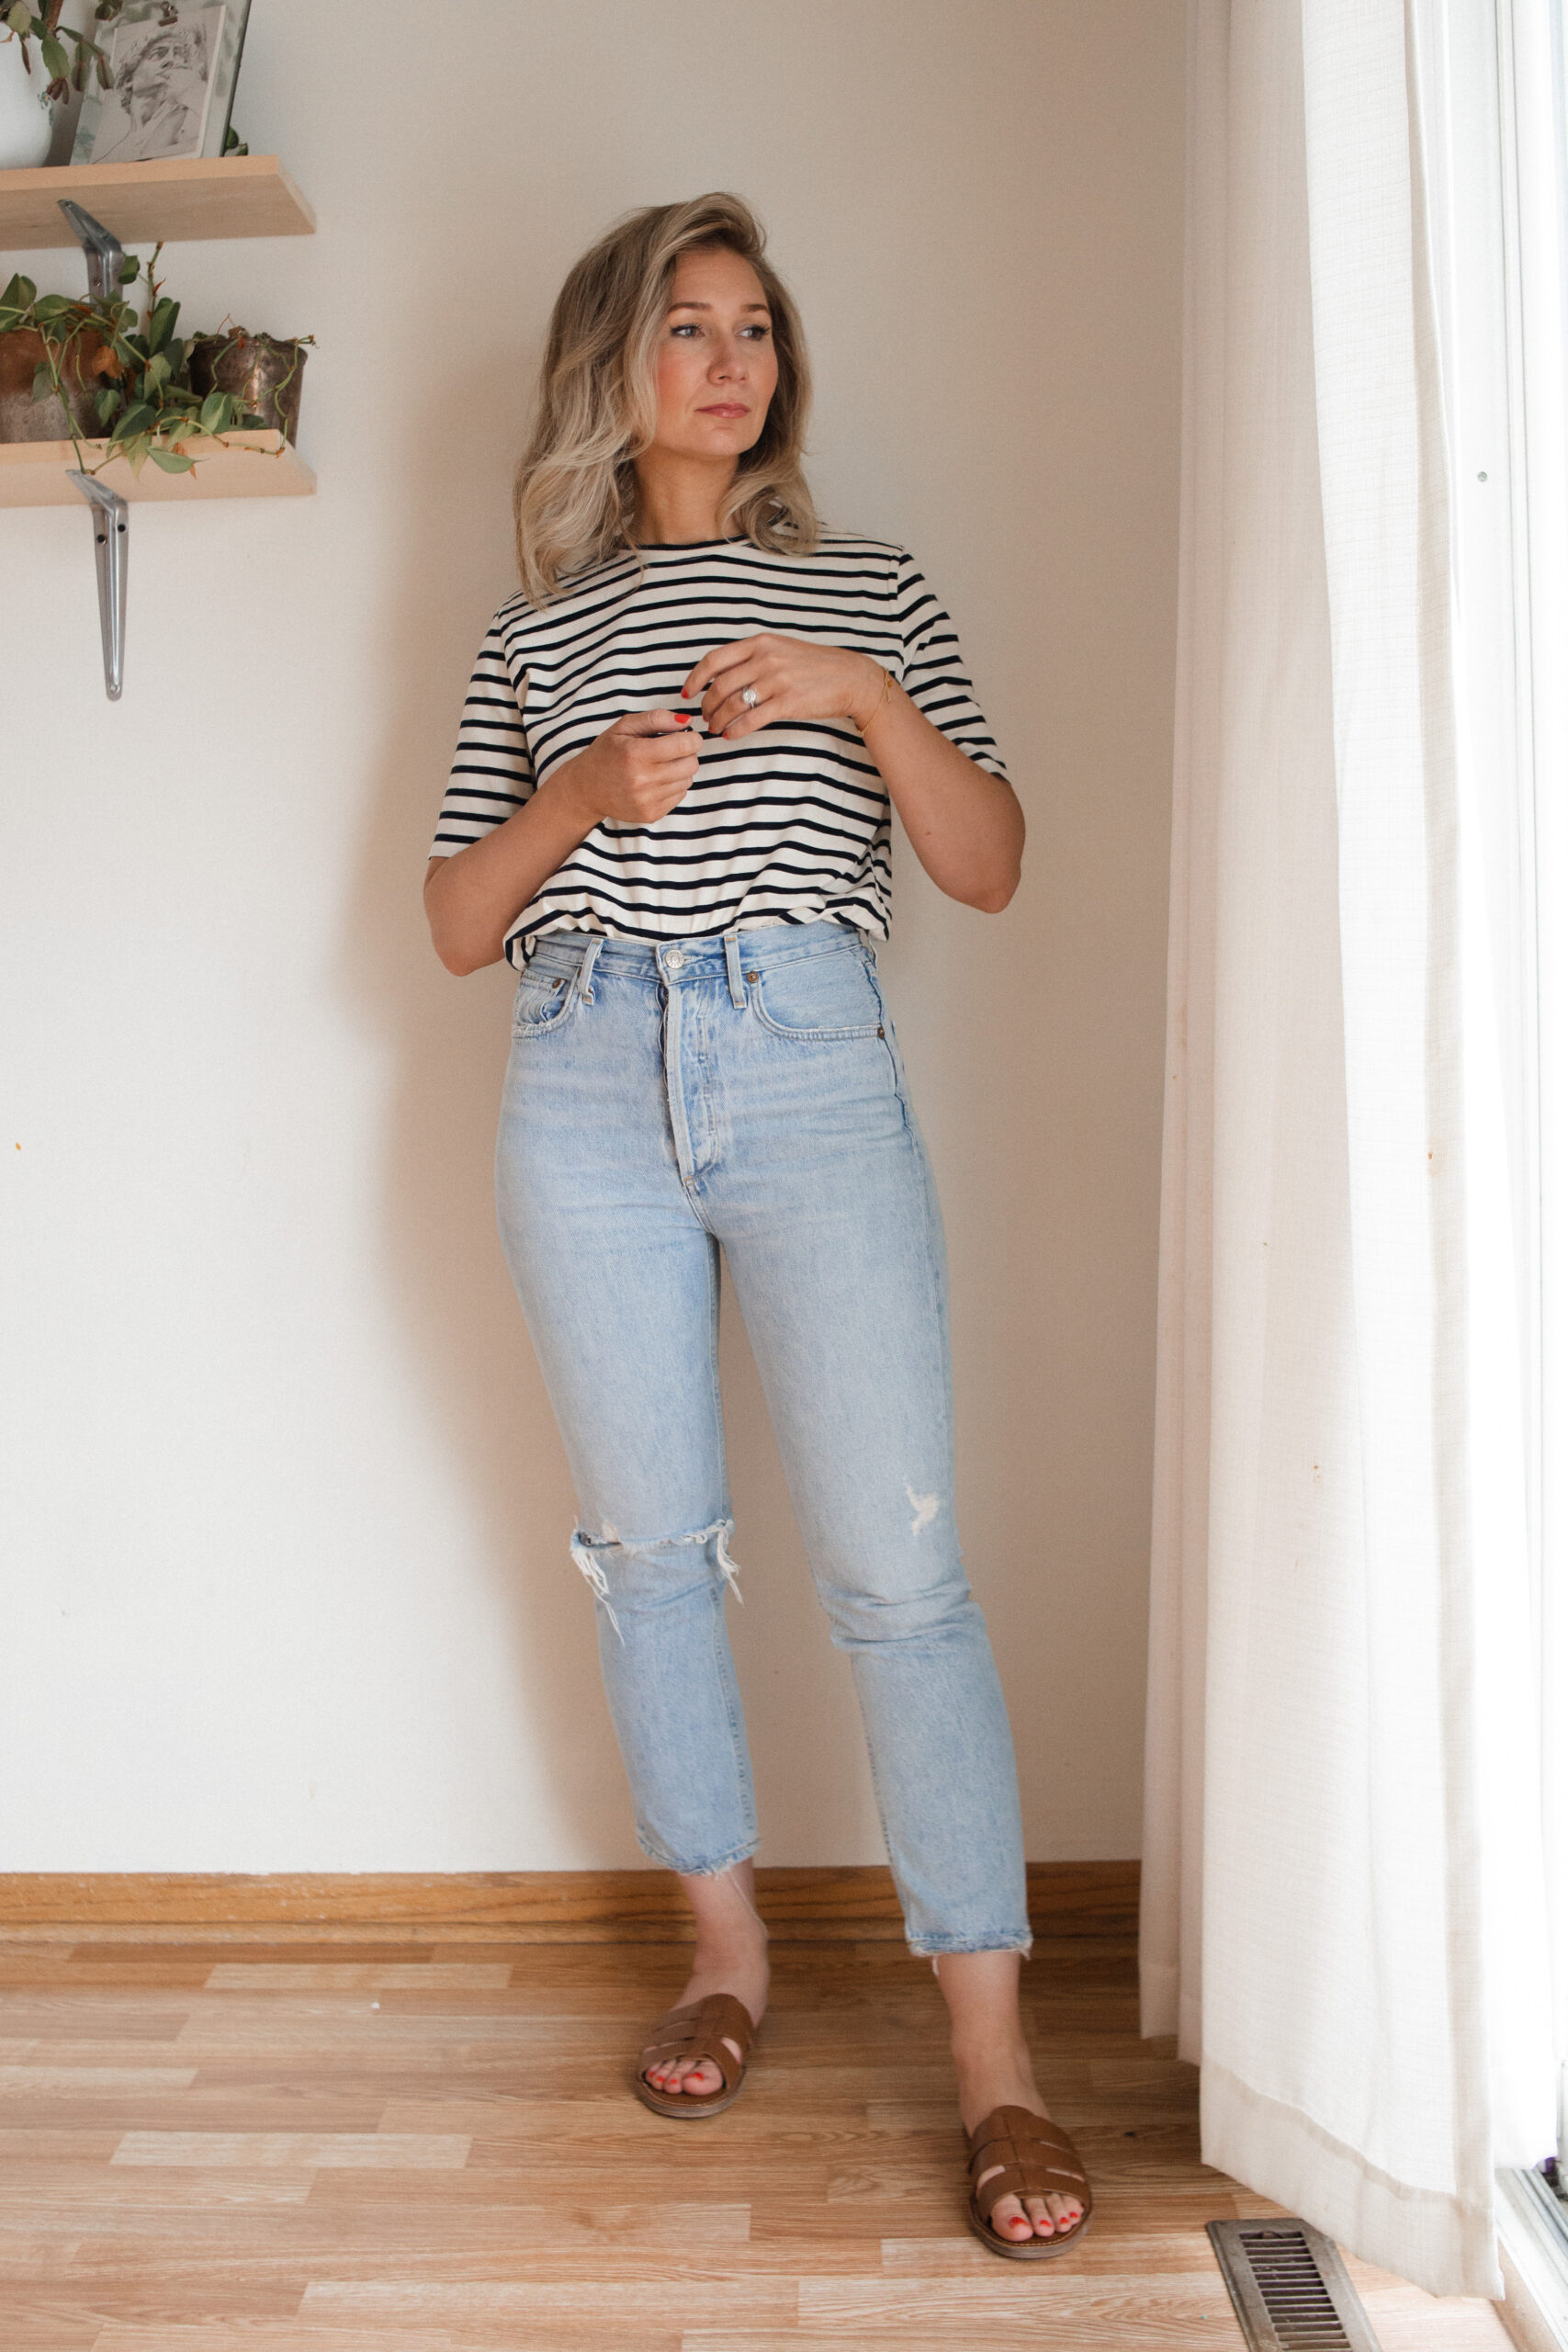 Karin Emily wears a pair of AGOLDE riley jeans with a striped tee and brown sandals for her AGOLDE denim guide